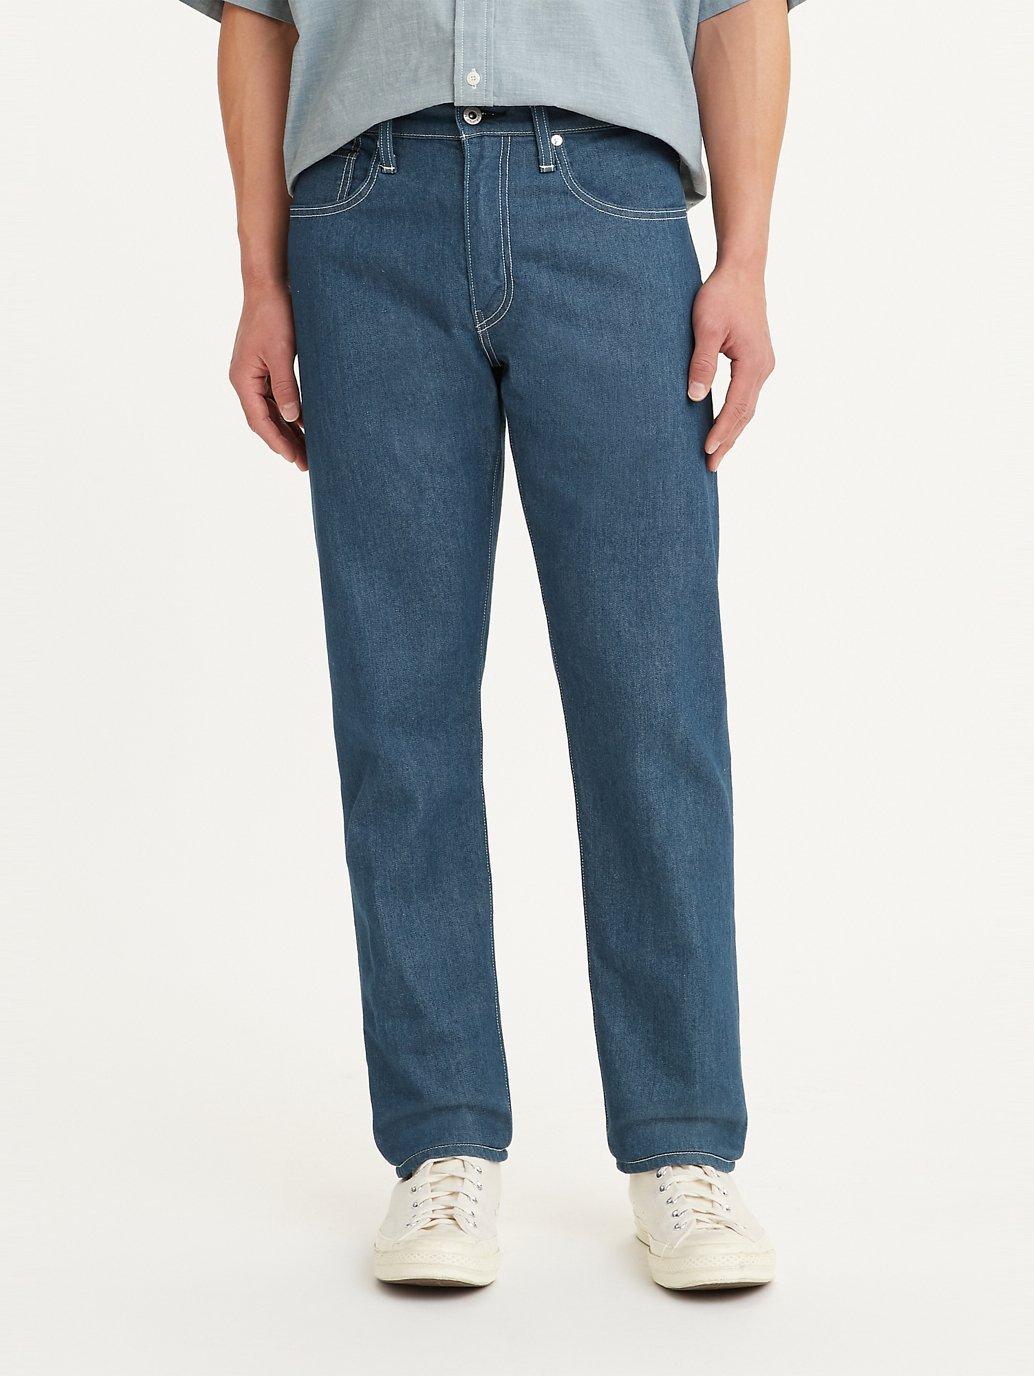 Buy Levi's® Made & Crafted® Men's 502™ Taper Jeans | Levi’s Official ...